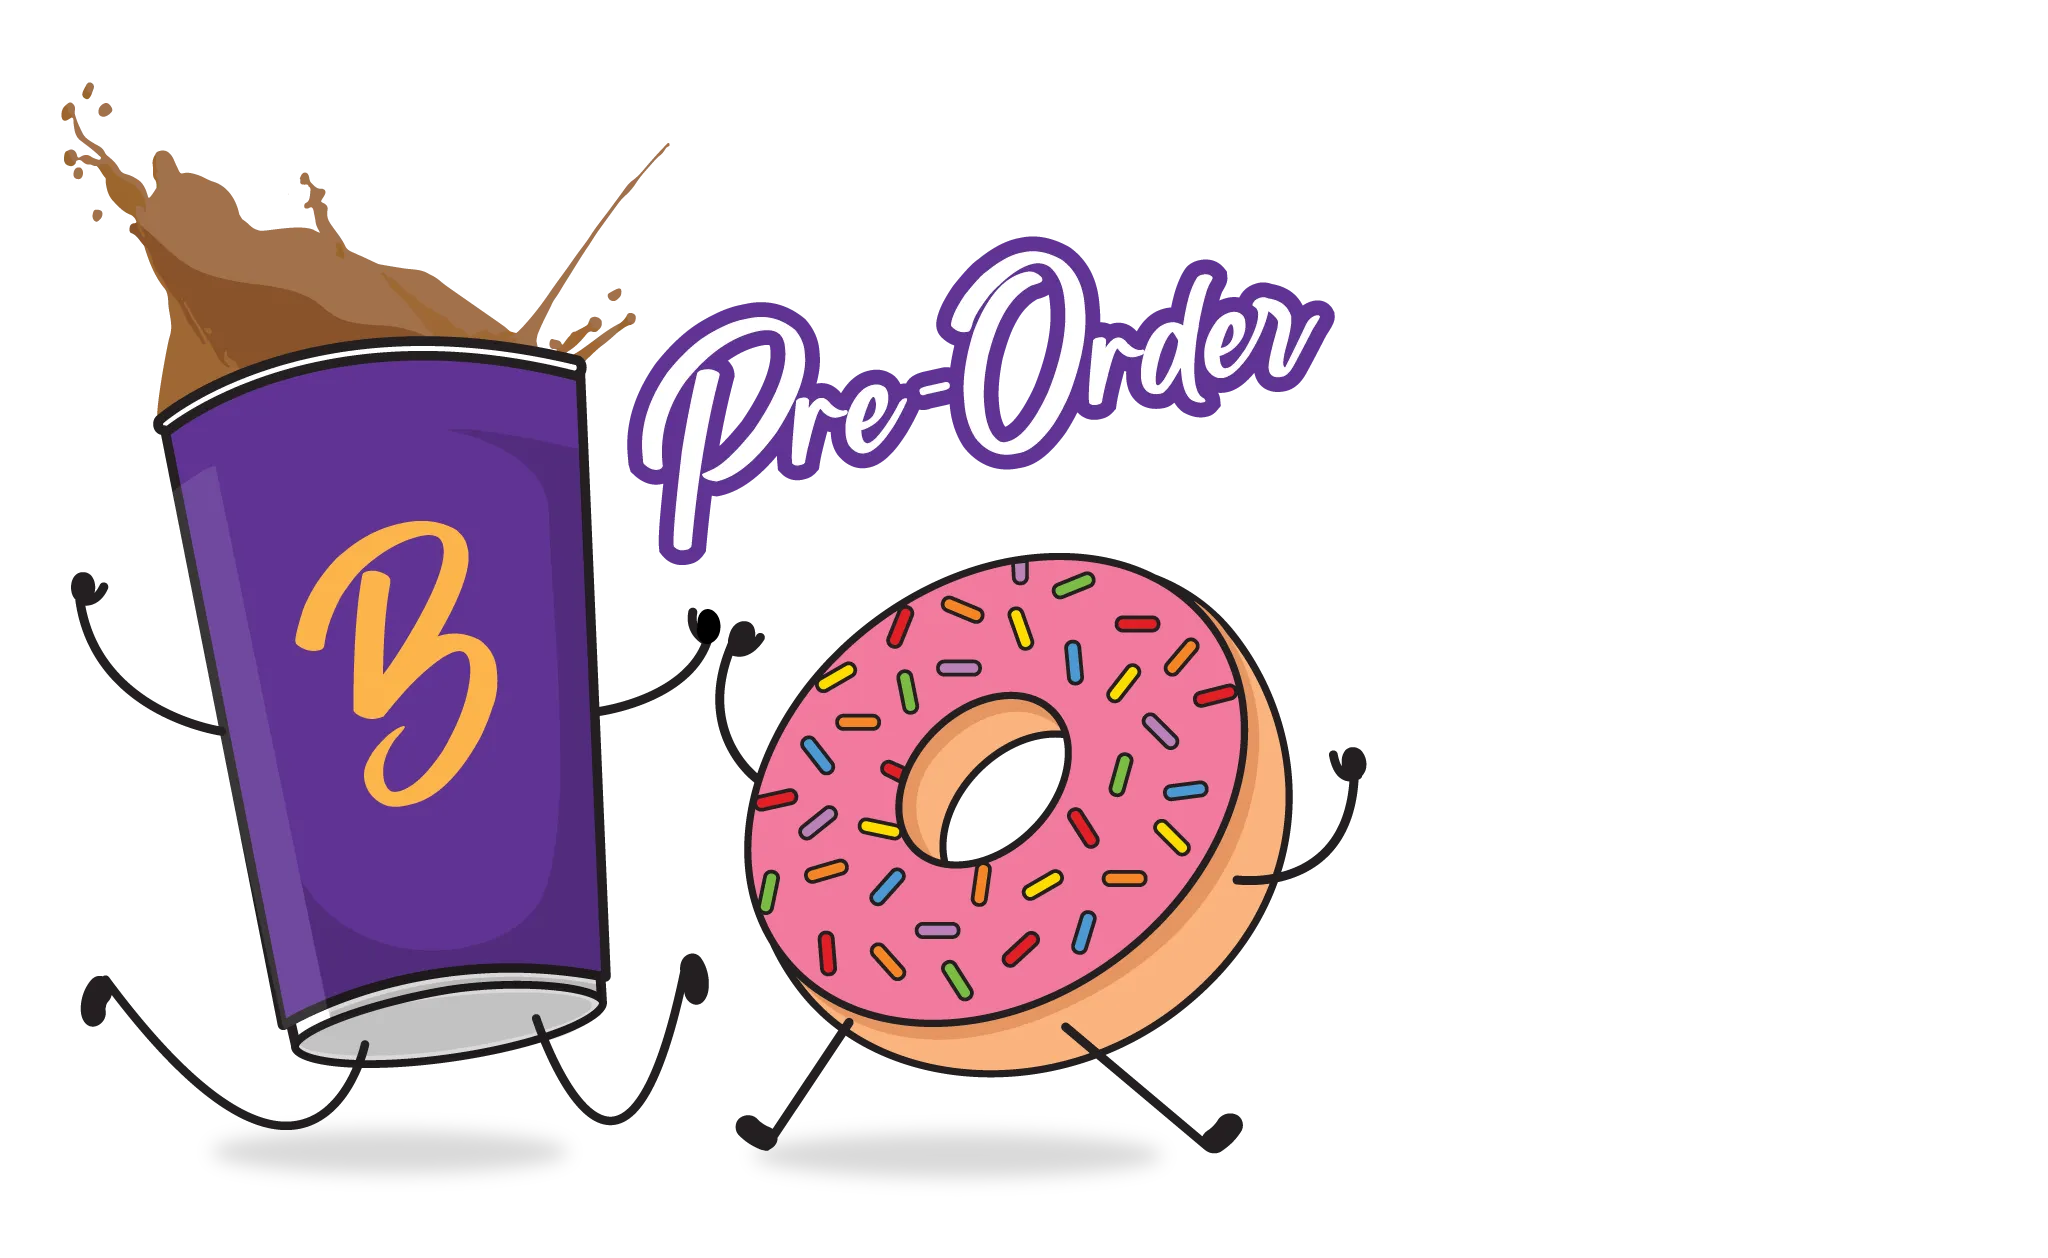 An illustration of a Baxter's coffee and donut with arms and legs jumping in celebration. The text "Pre-Order" is superimposed above.